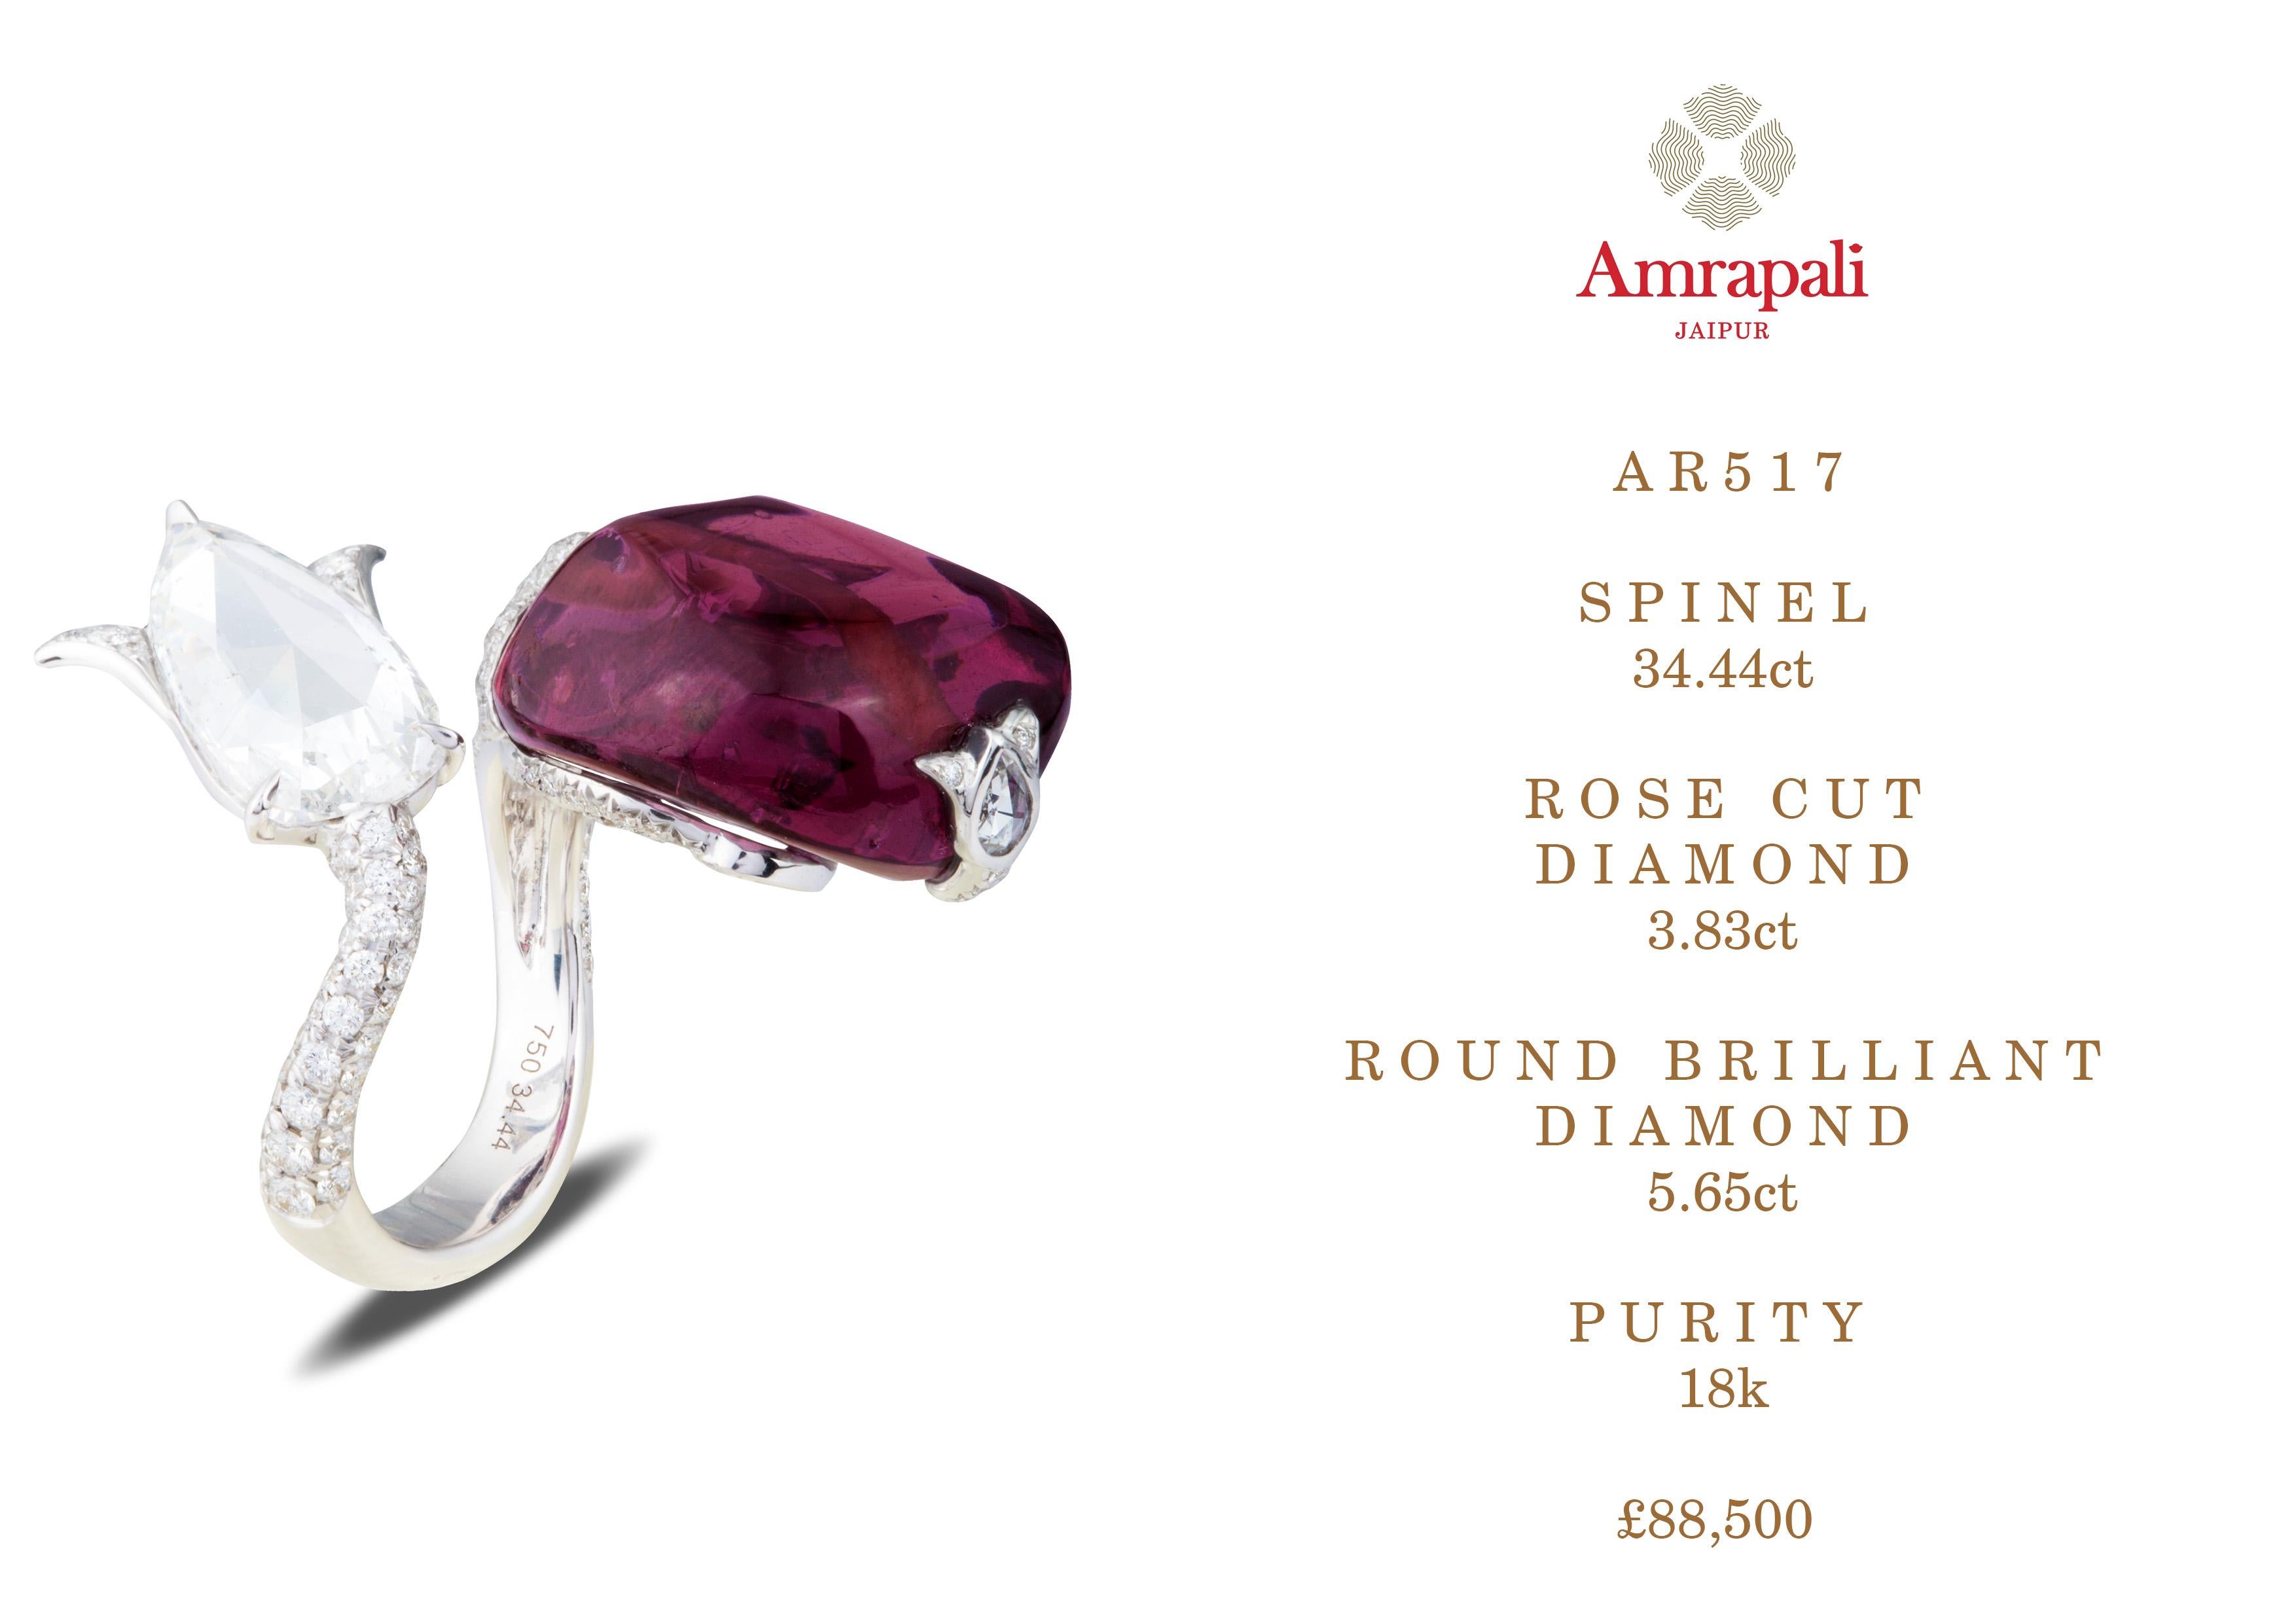 Amrapali Jewels 18 Karat White Gold Spinel and Diamond Ring

Spinel and Diamond ring from Amrapali Jewels incorporates a 34.44ct antique 250 year-old Spinel from The Royal Collection, perfectly paired with a 3.83ct Rose Cut Diamond.

Spinel weight -